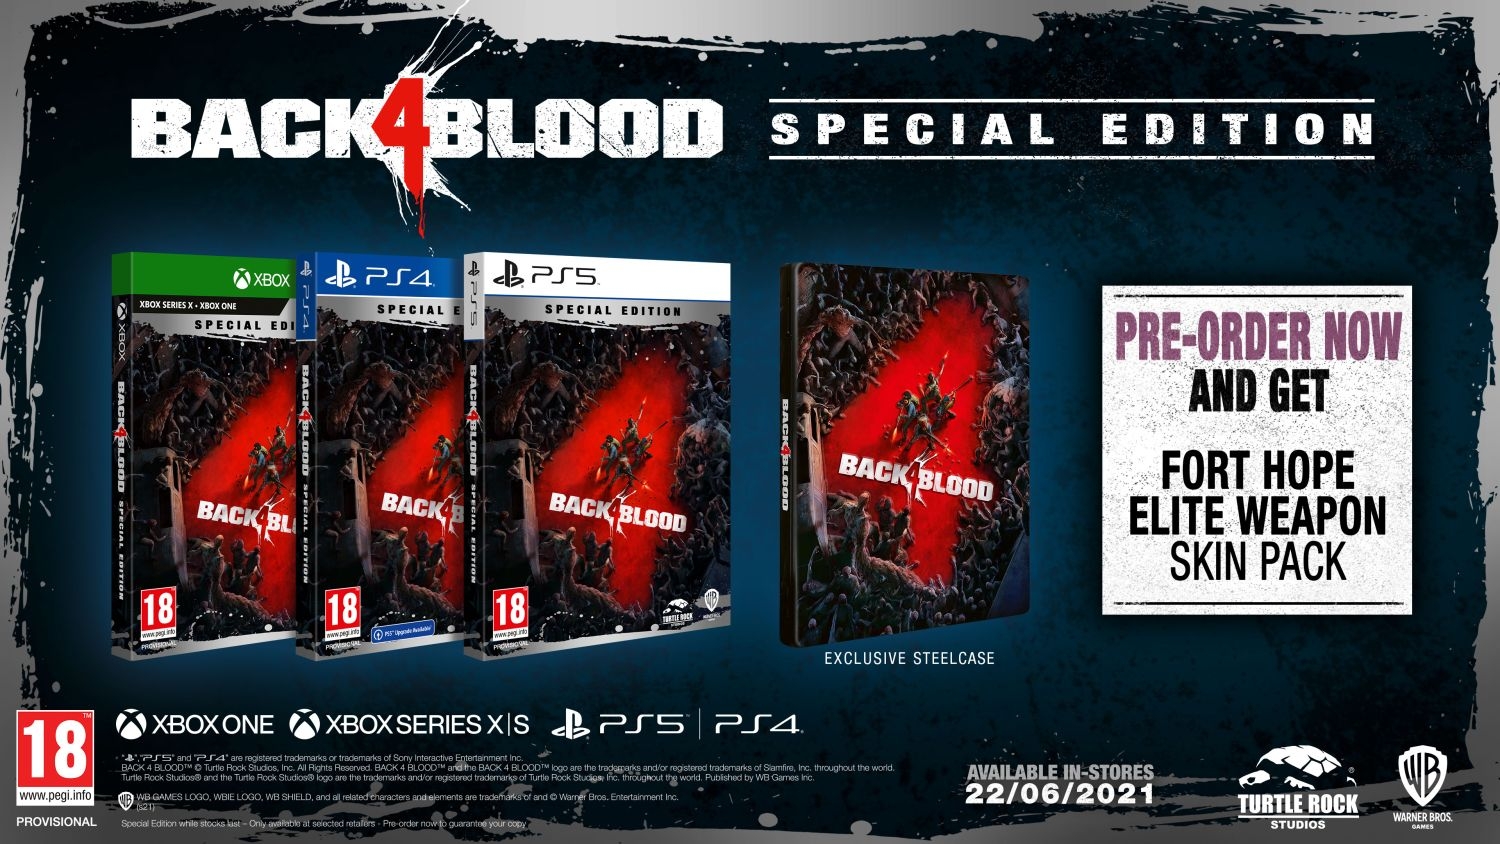 Back 4 Blood: Specialist Edition (PS5)